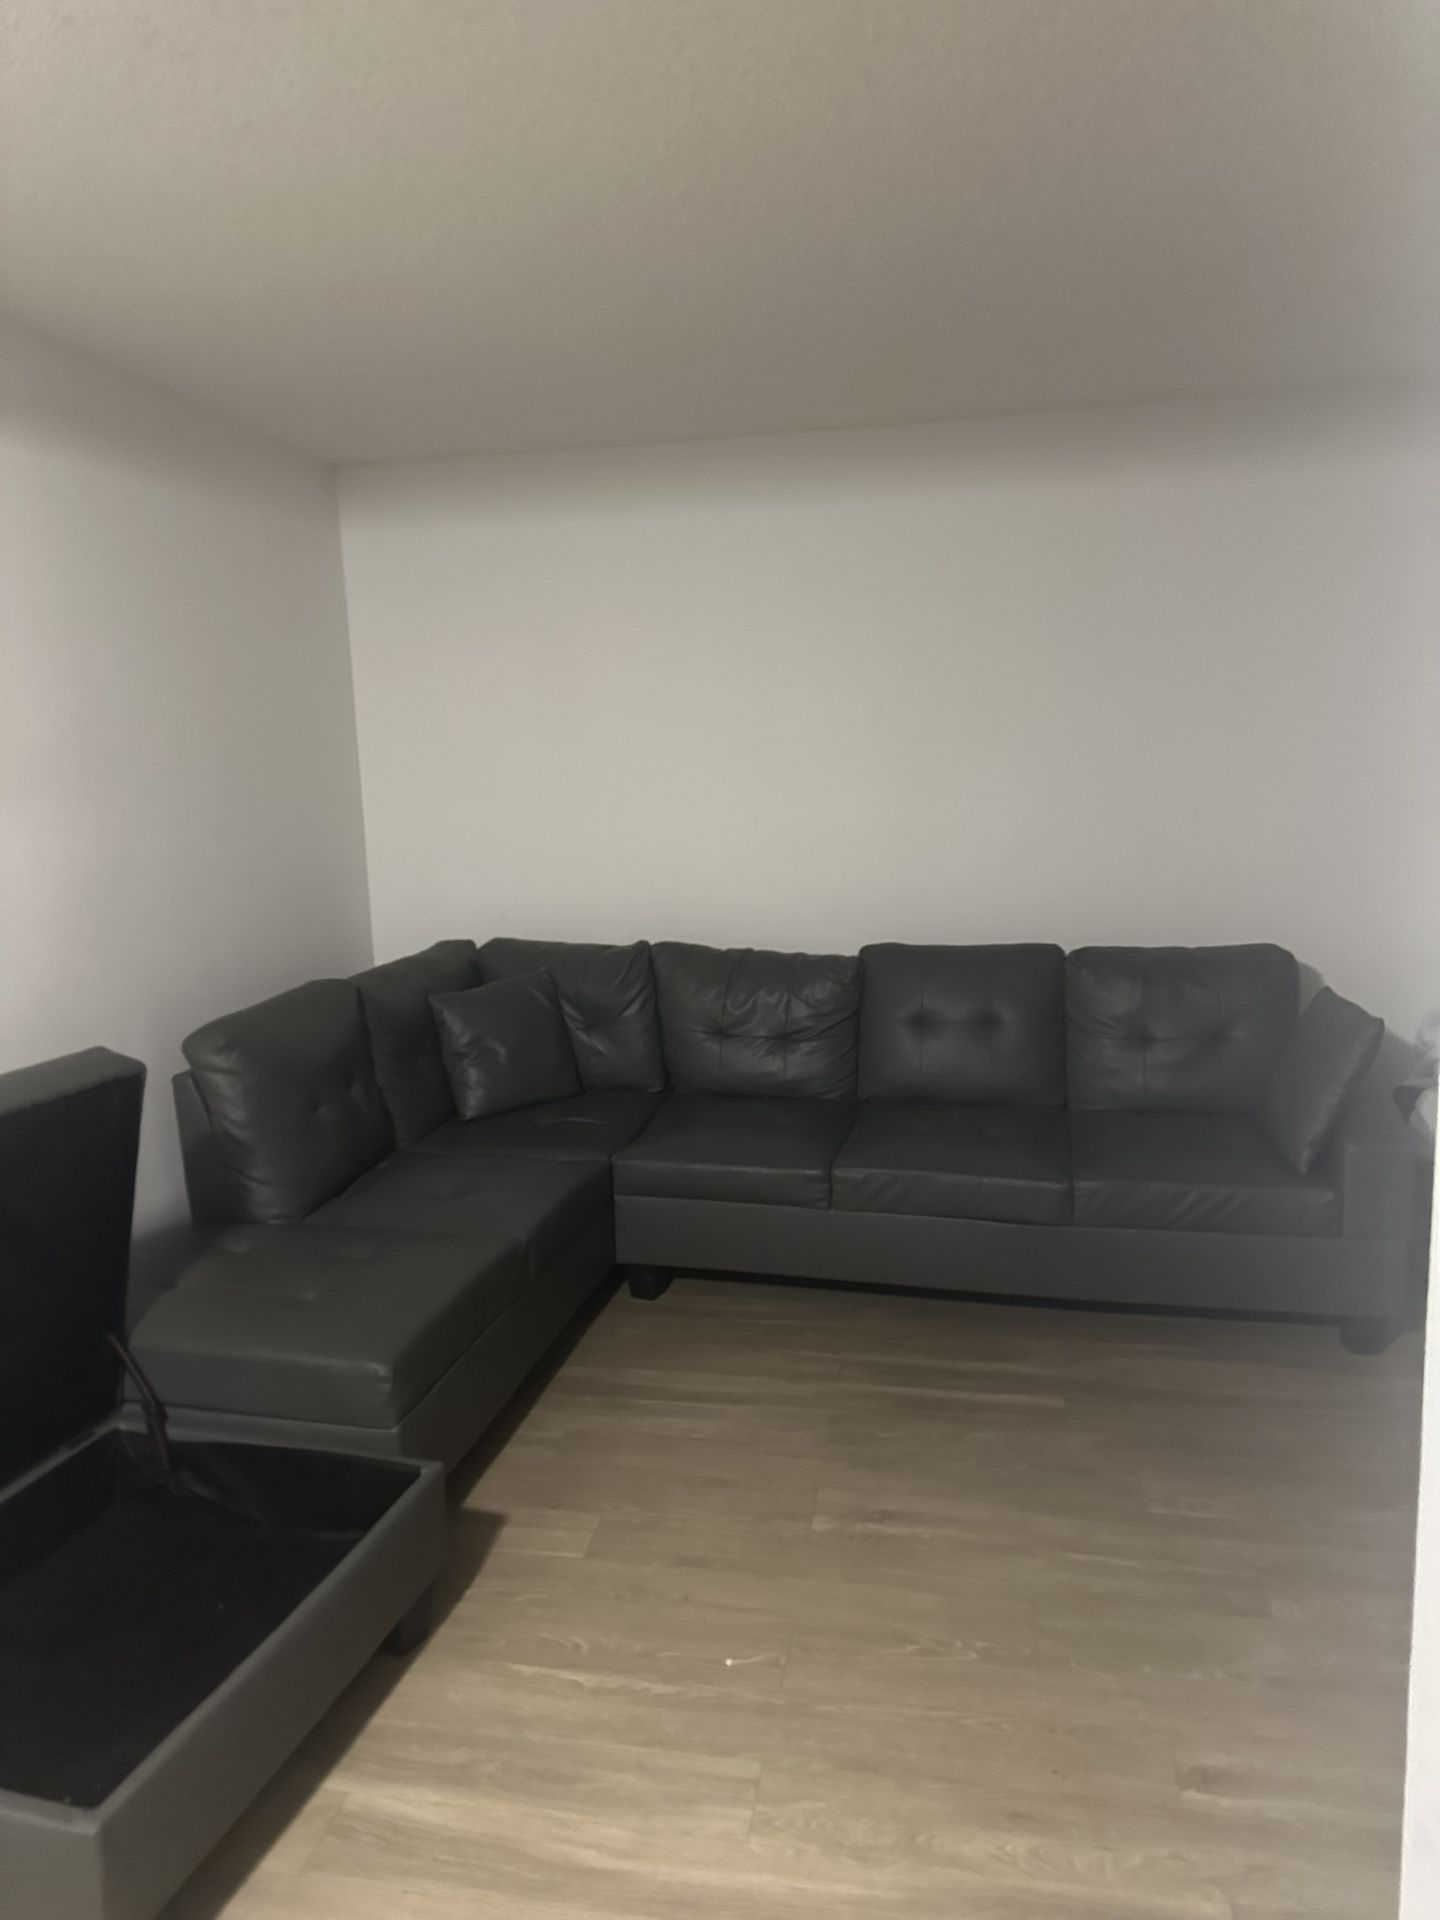 Grey sectional couch 